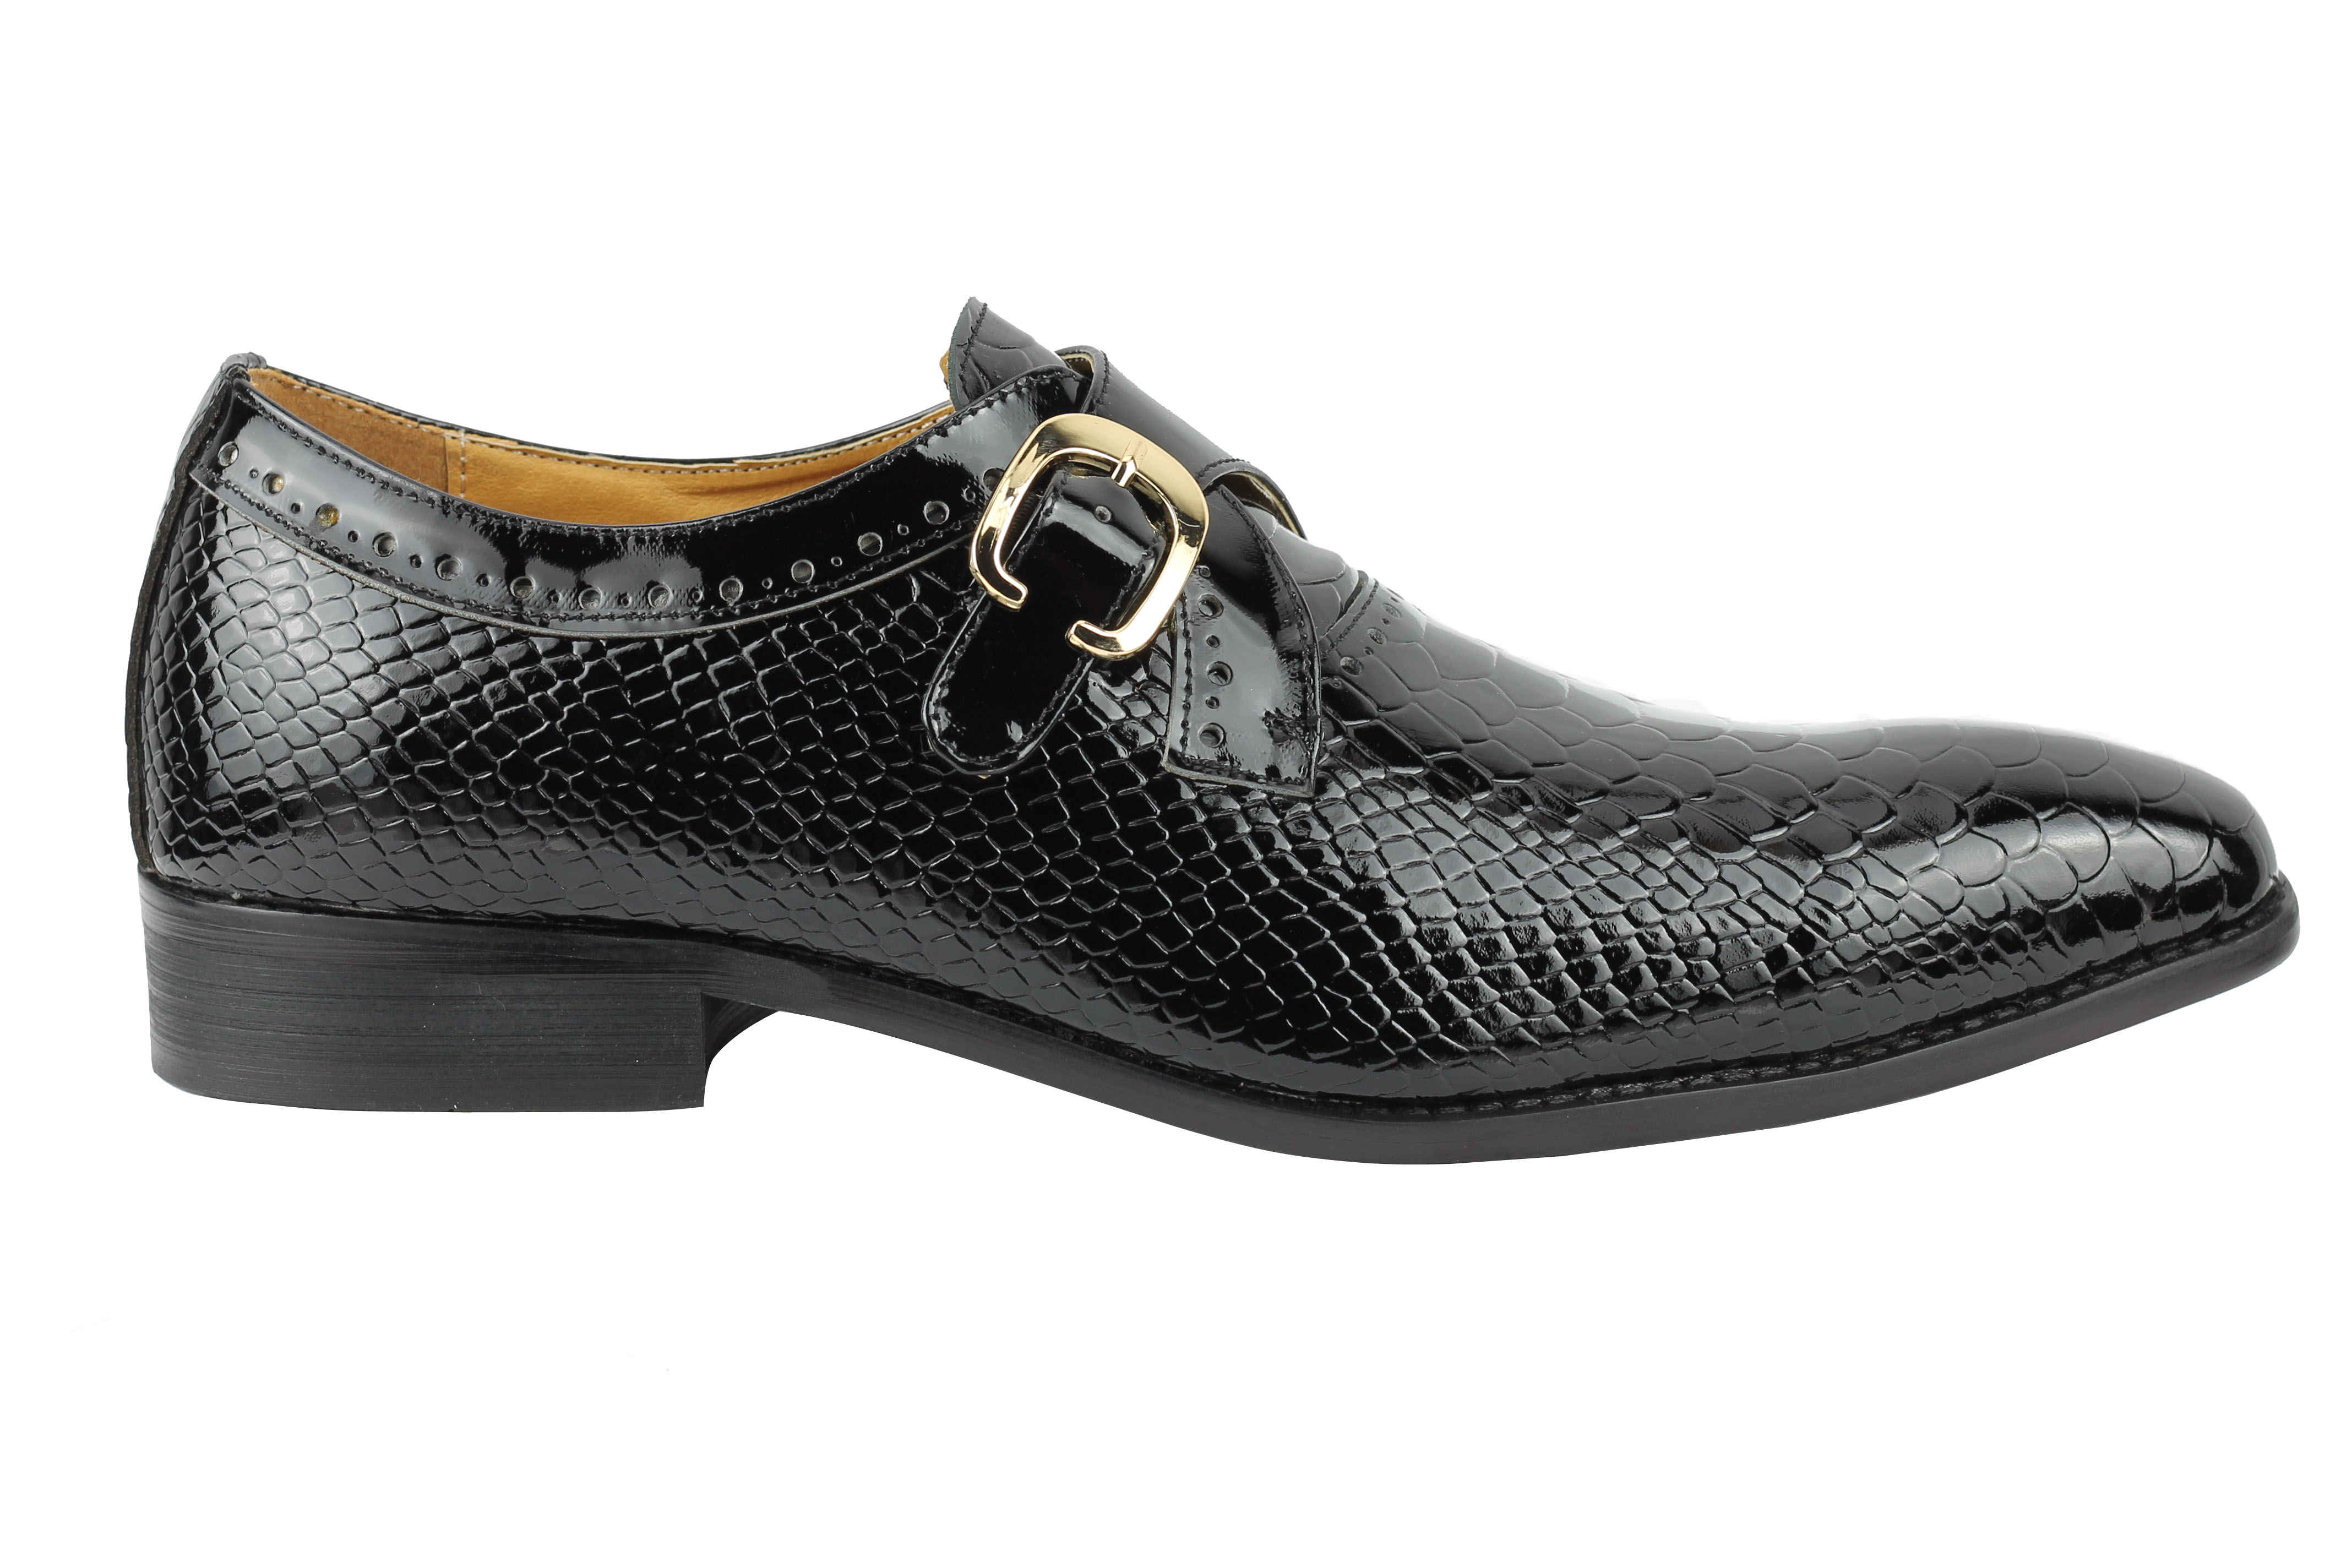 Black Printed Leather Shoes With Monk